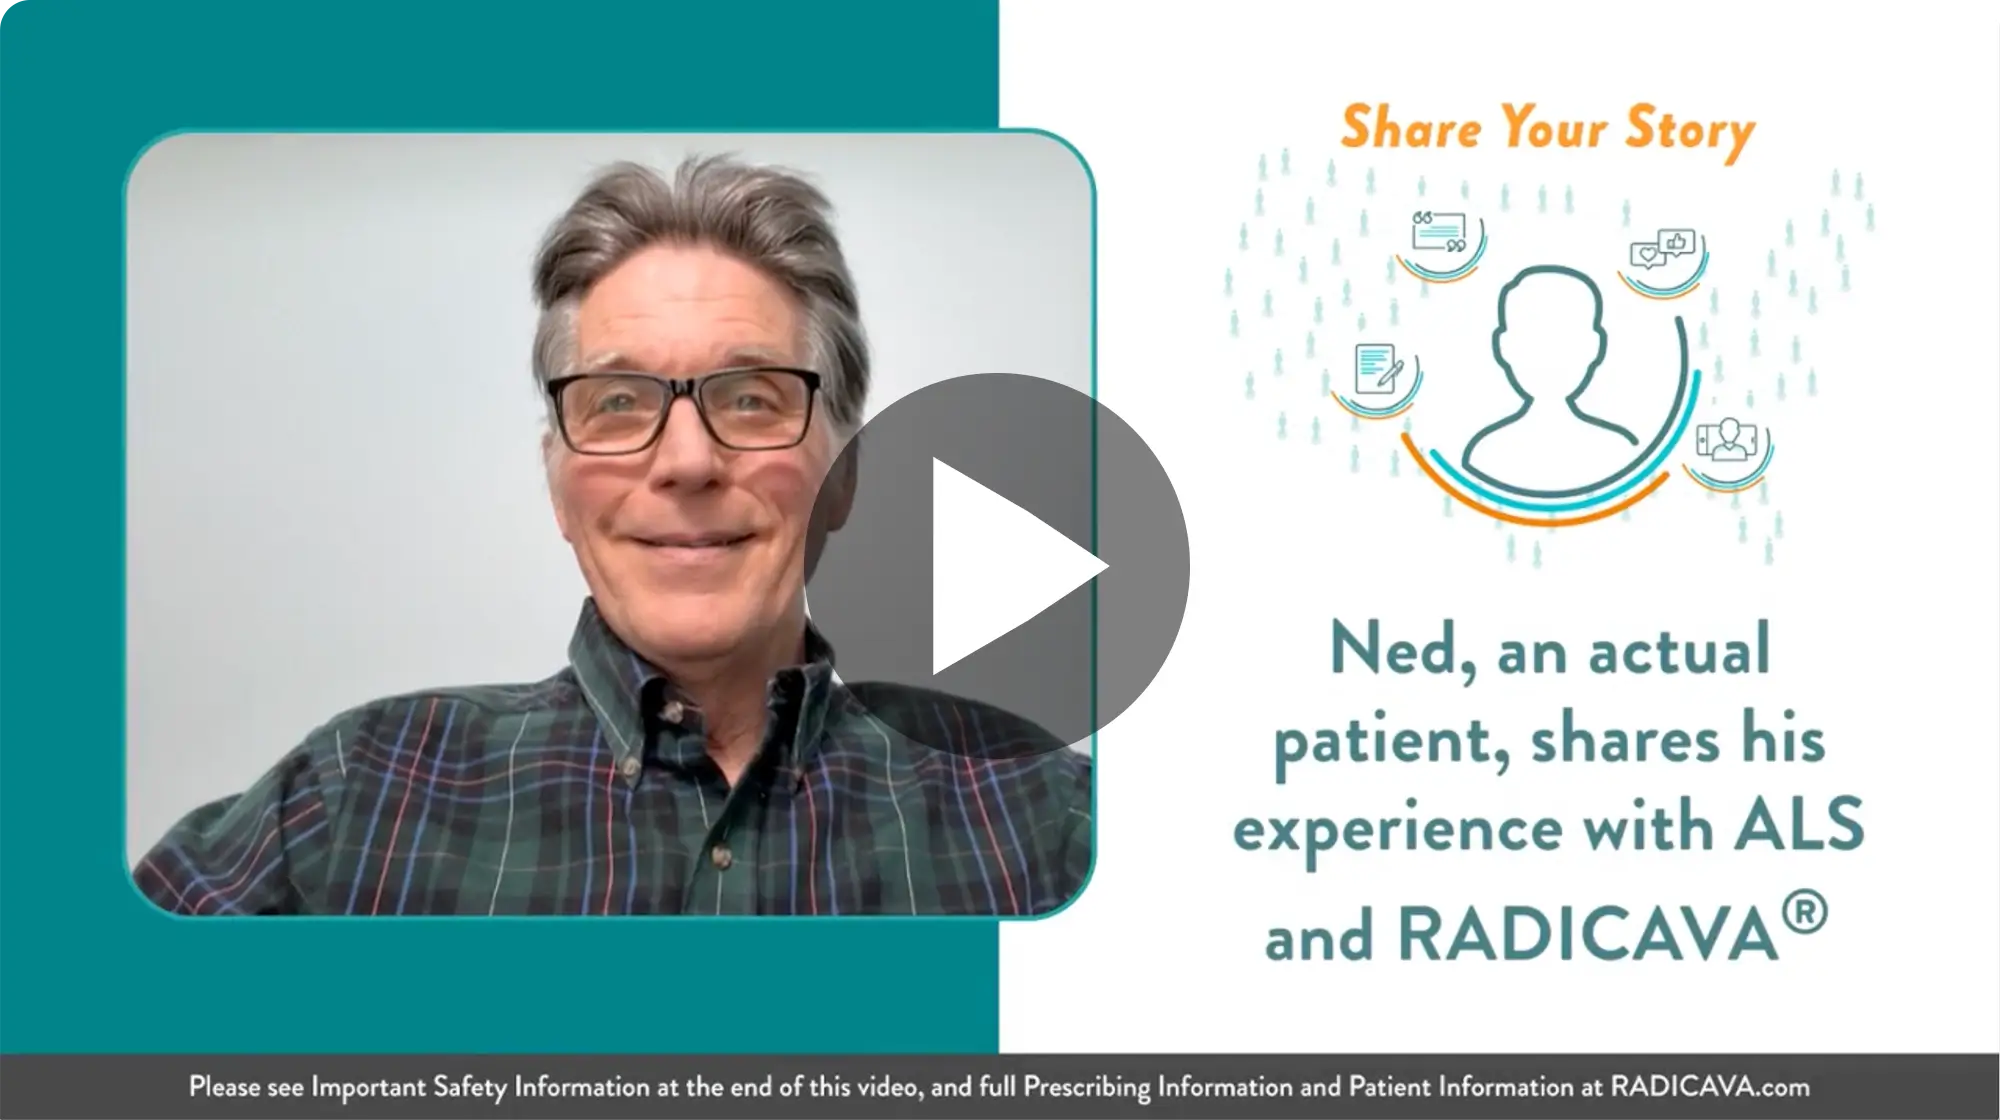 Ned shares his experience with ALS and RADICAVA®